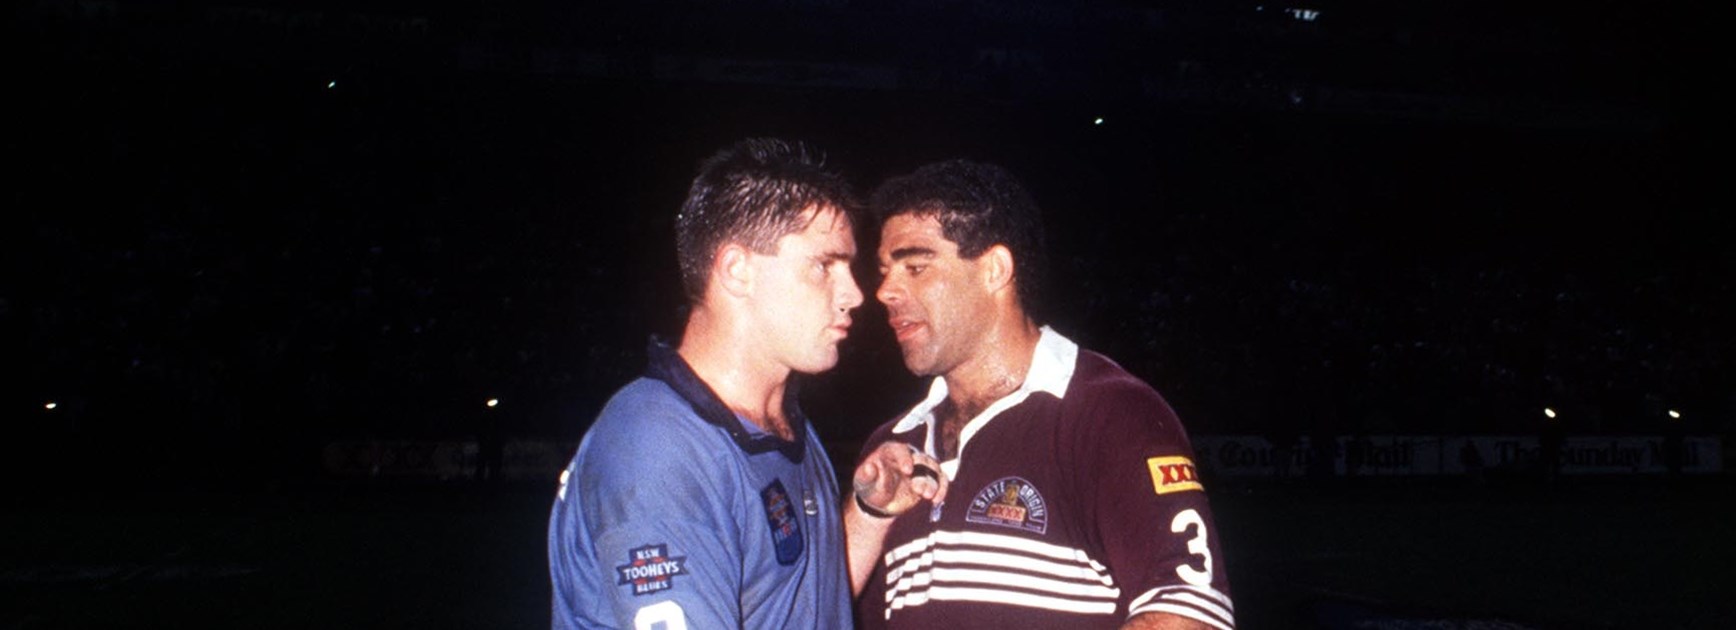 Brad Fittler and Mal Meninga chat at the end of one of the 1994 Origin matches.